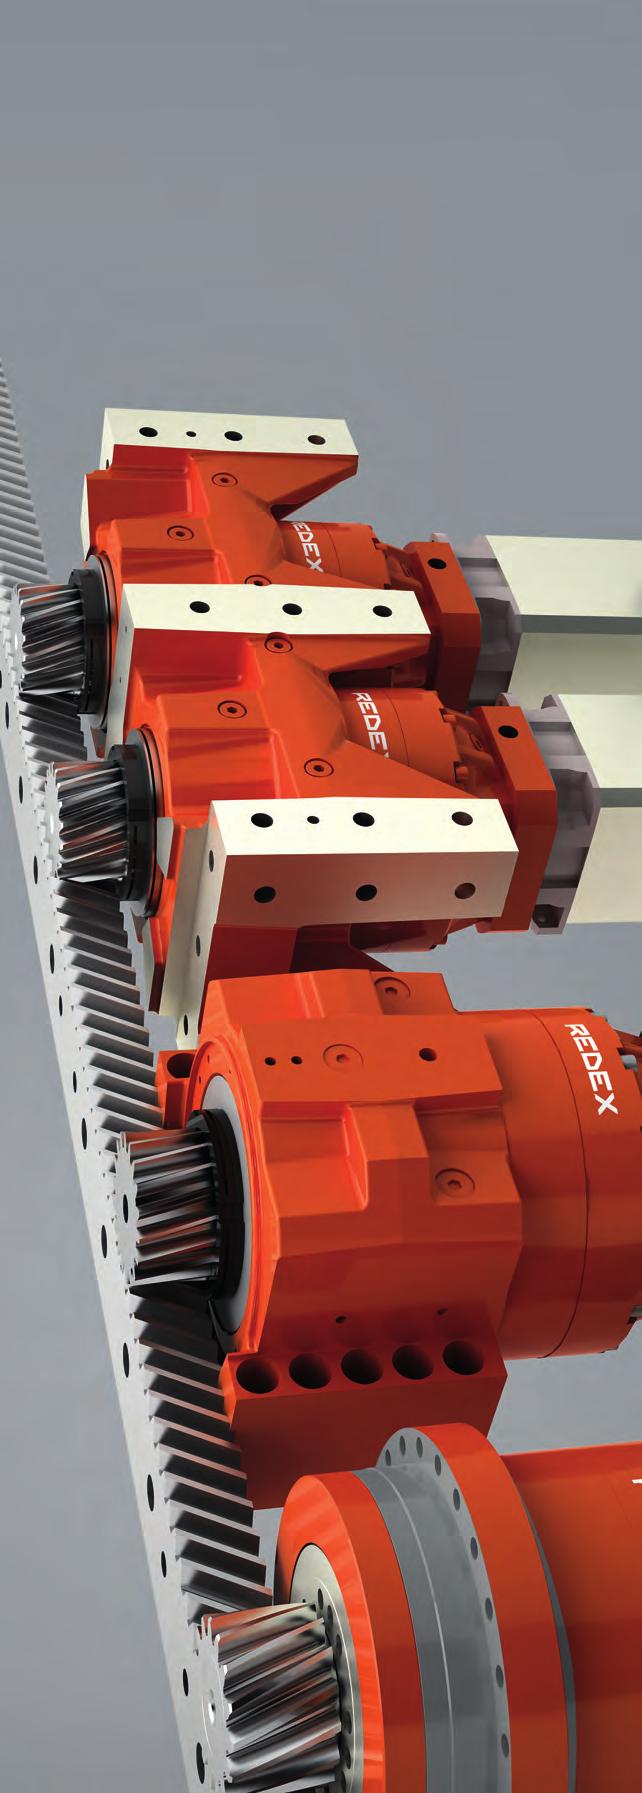 DRP KRPX KRP Linear & Rotary Axis Drive REDEX offers the most comprehensive range in machine-tool drives.